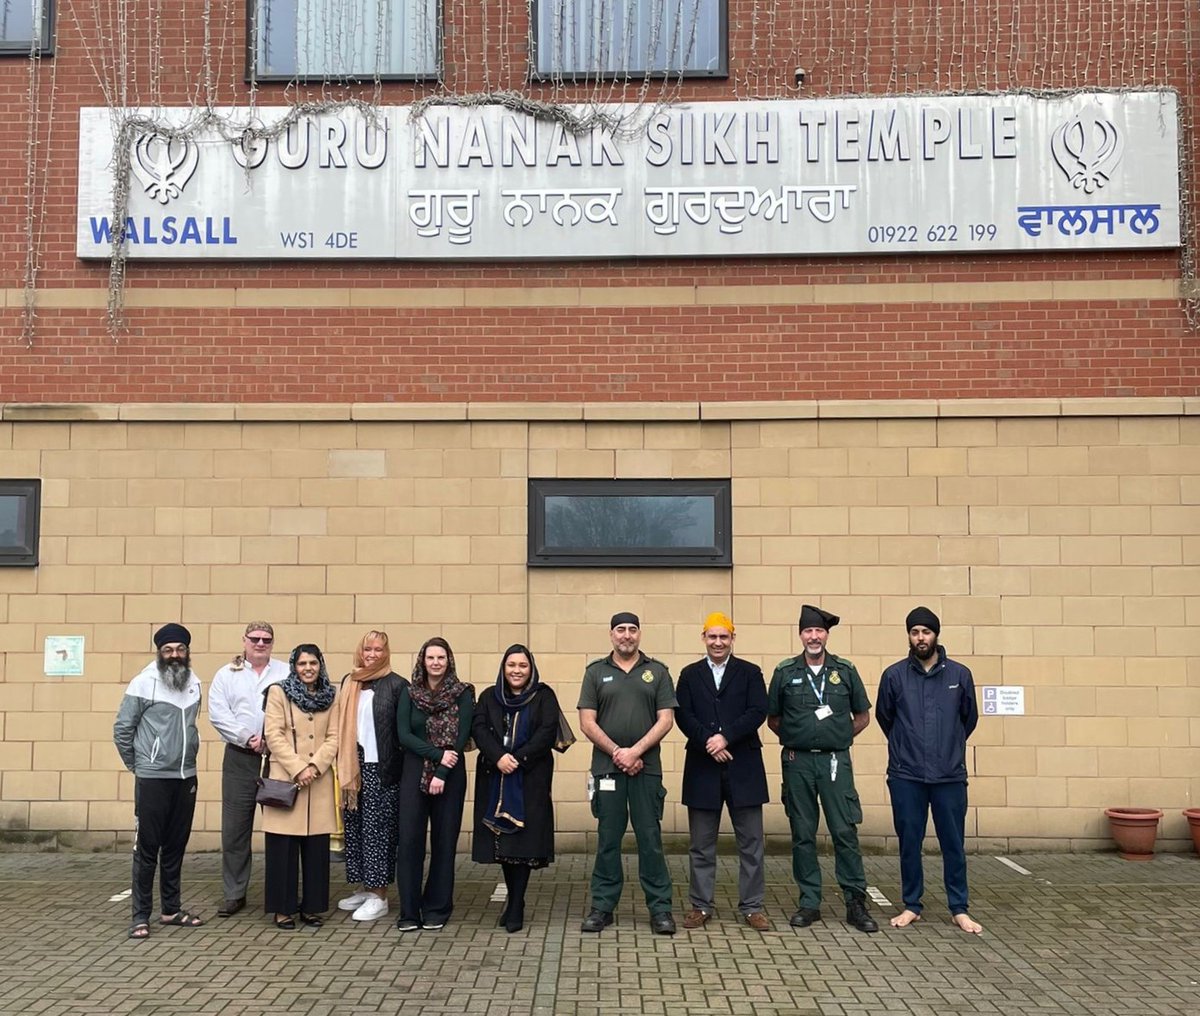 To celebrate #Vaisakhi, the Trust arranged a brilliant Gurdwara visit on Monday. The event included a guided tour of the Gurdwara in Walsall, a presentation about Sikhi and Vaishakhi and, of course, some delicious langar (food). Happy Vaisakhi to everyone celebrating! 🎉